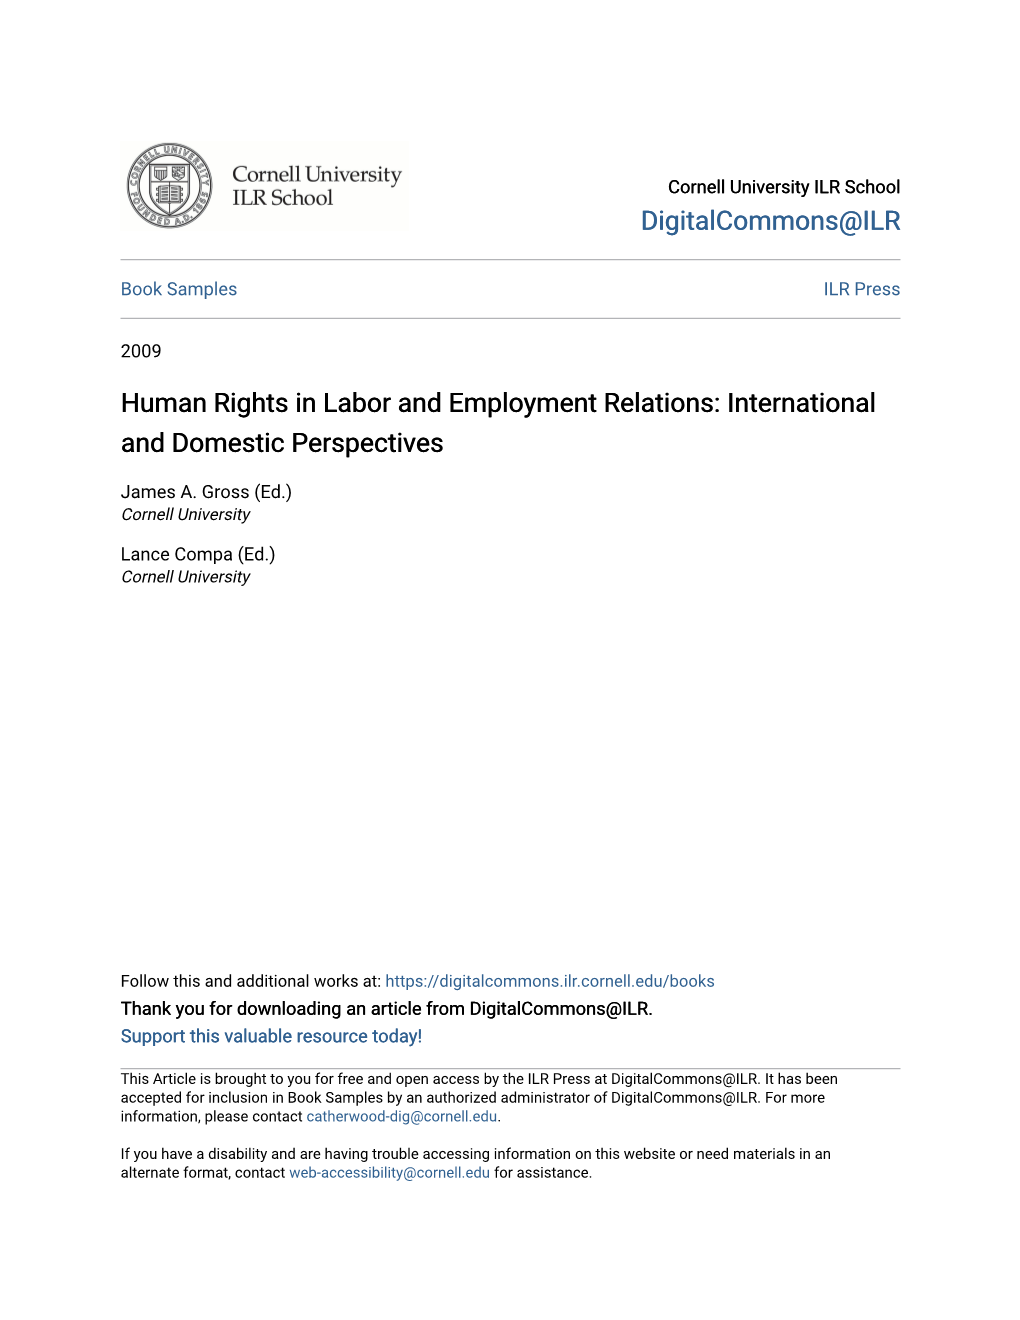 Human Rights in Labor and Employment Relations: International and Domestic Perspectives